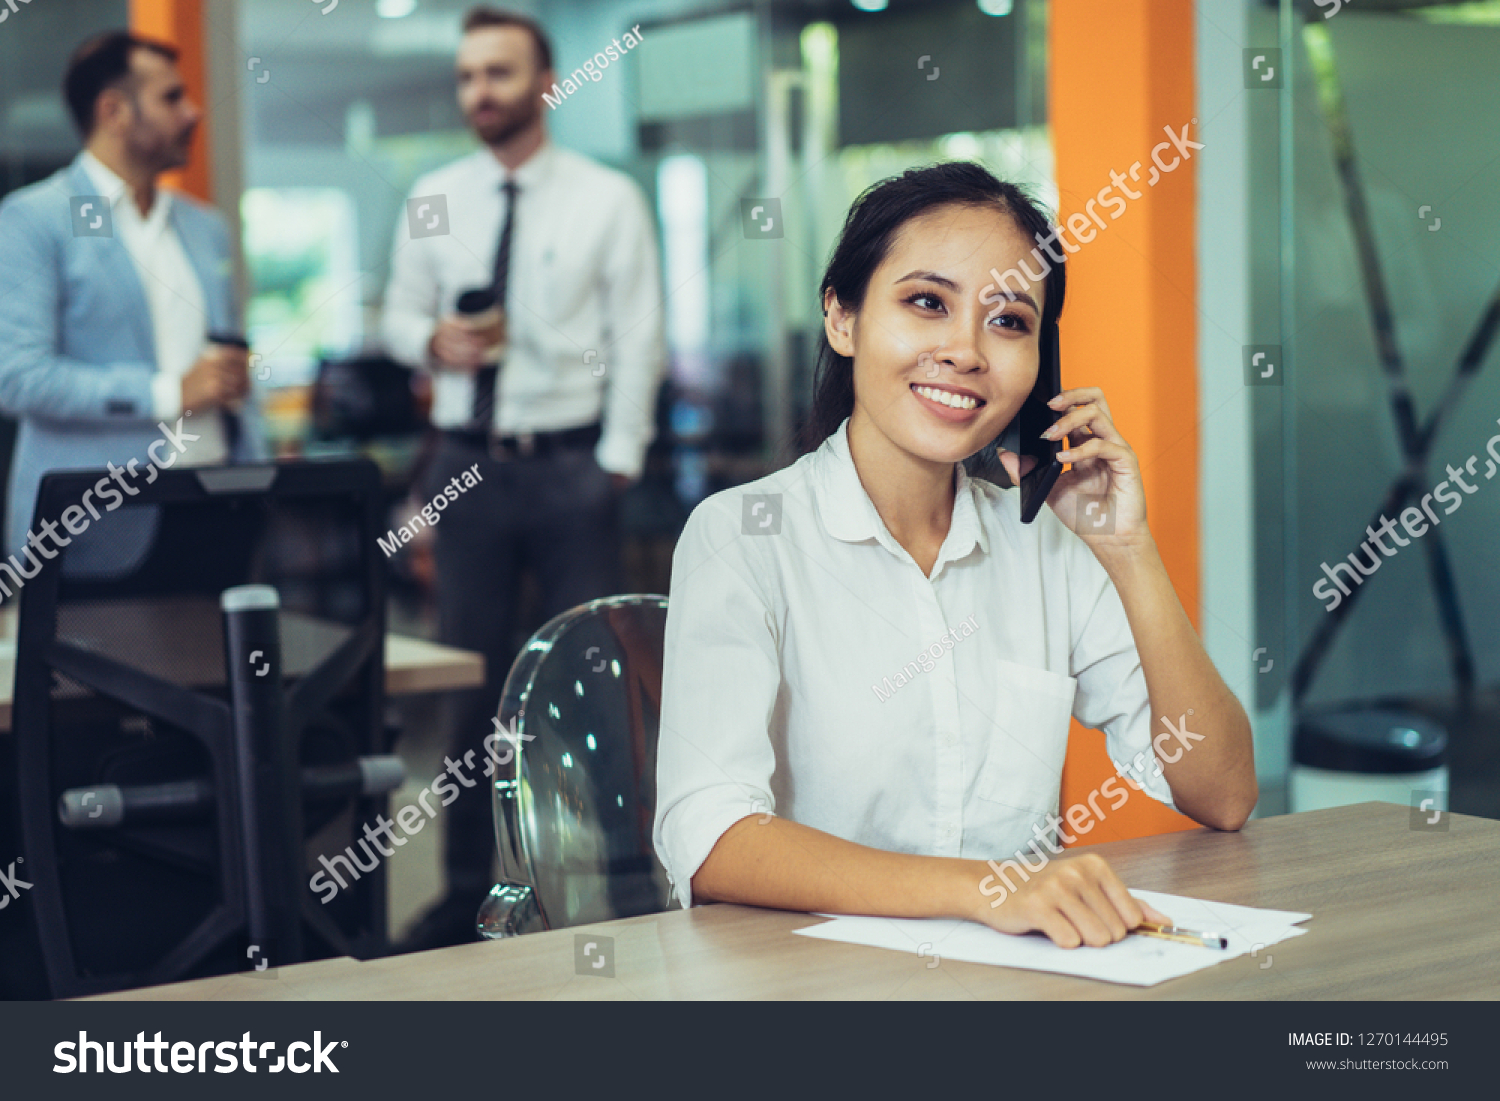 Smiling young Asian business woman talking on phone and working at desk in office. Two coworkers relaxing and standing in background. Management and communication concept. #1270144495